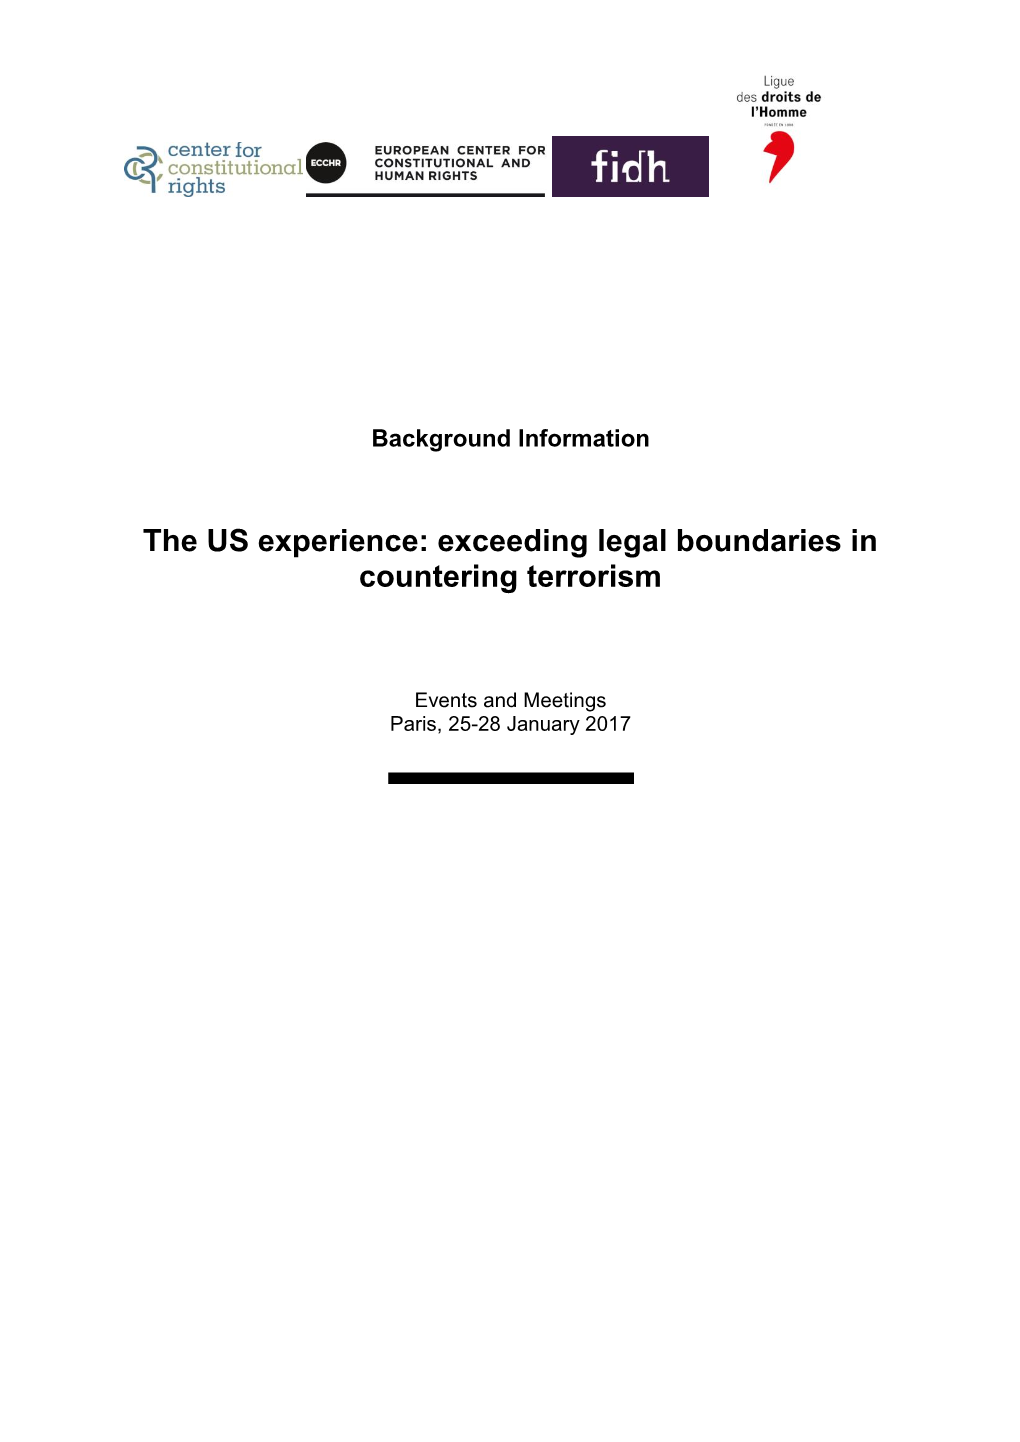 The US Experience: Exceeding Legal Boundaries in Countering Terrorism